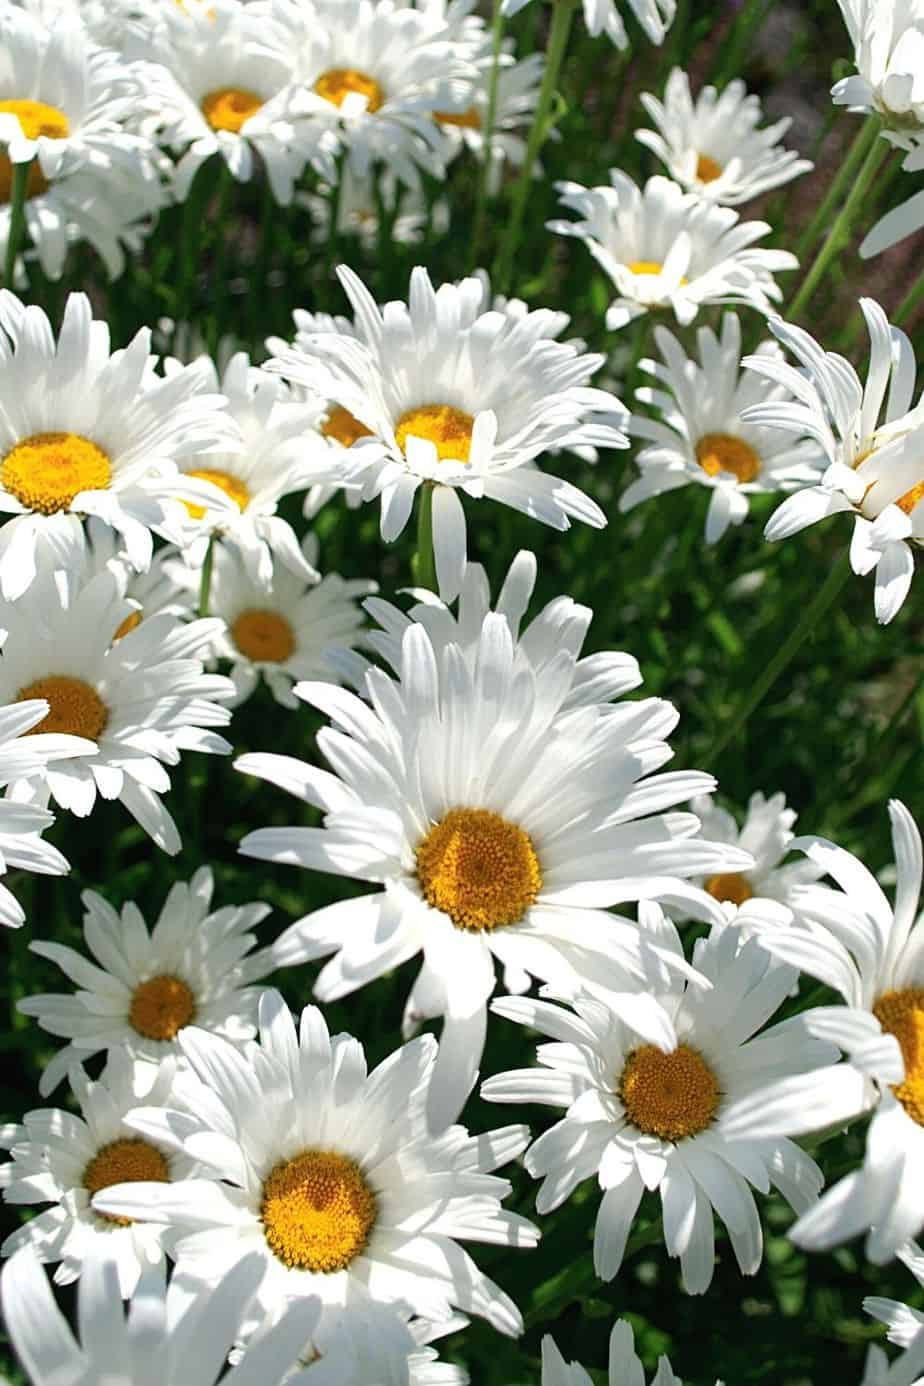 Leucanthemum x superbum (Snowcap Shasta Daisy), an easy-to-care-for plant, will thrive in the shady and cool environment of the northwest facing garden